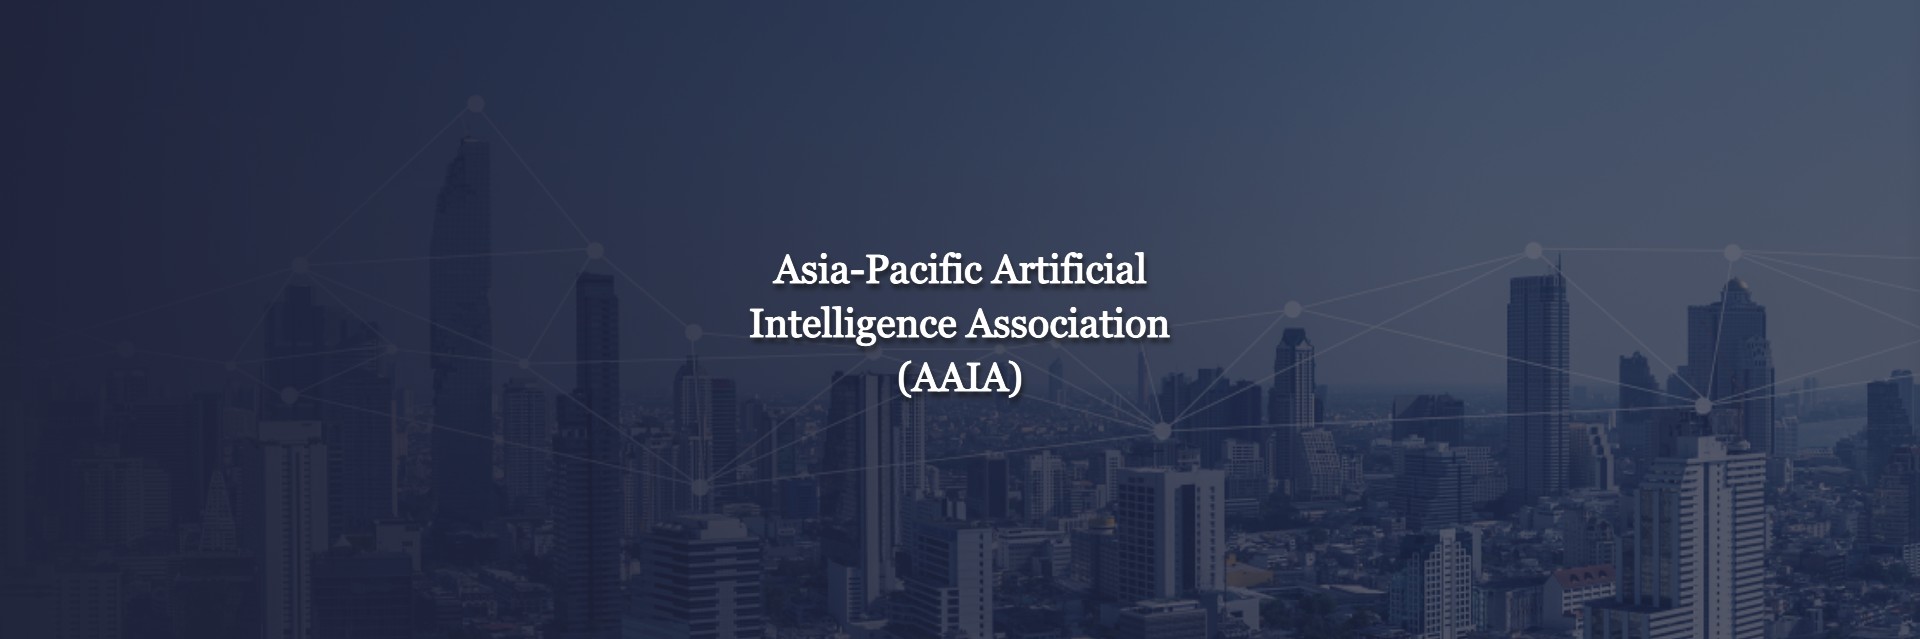 Election of the professor Touradj Ebrahimi as a Fellow of the Asia-Pacific Artificial Intelligence Association